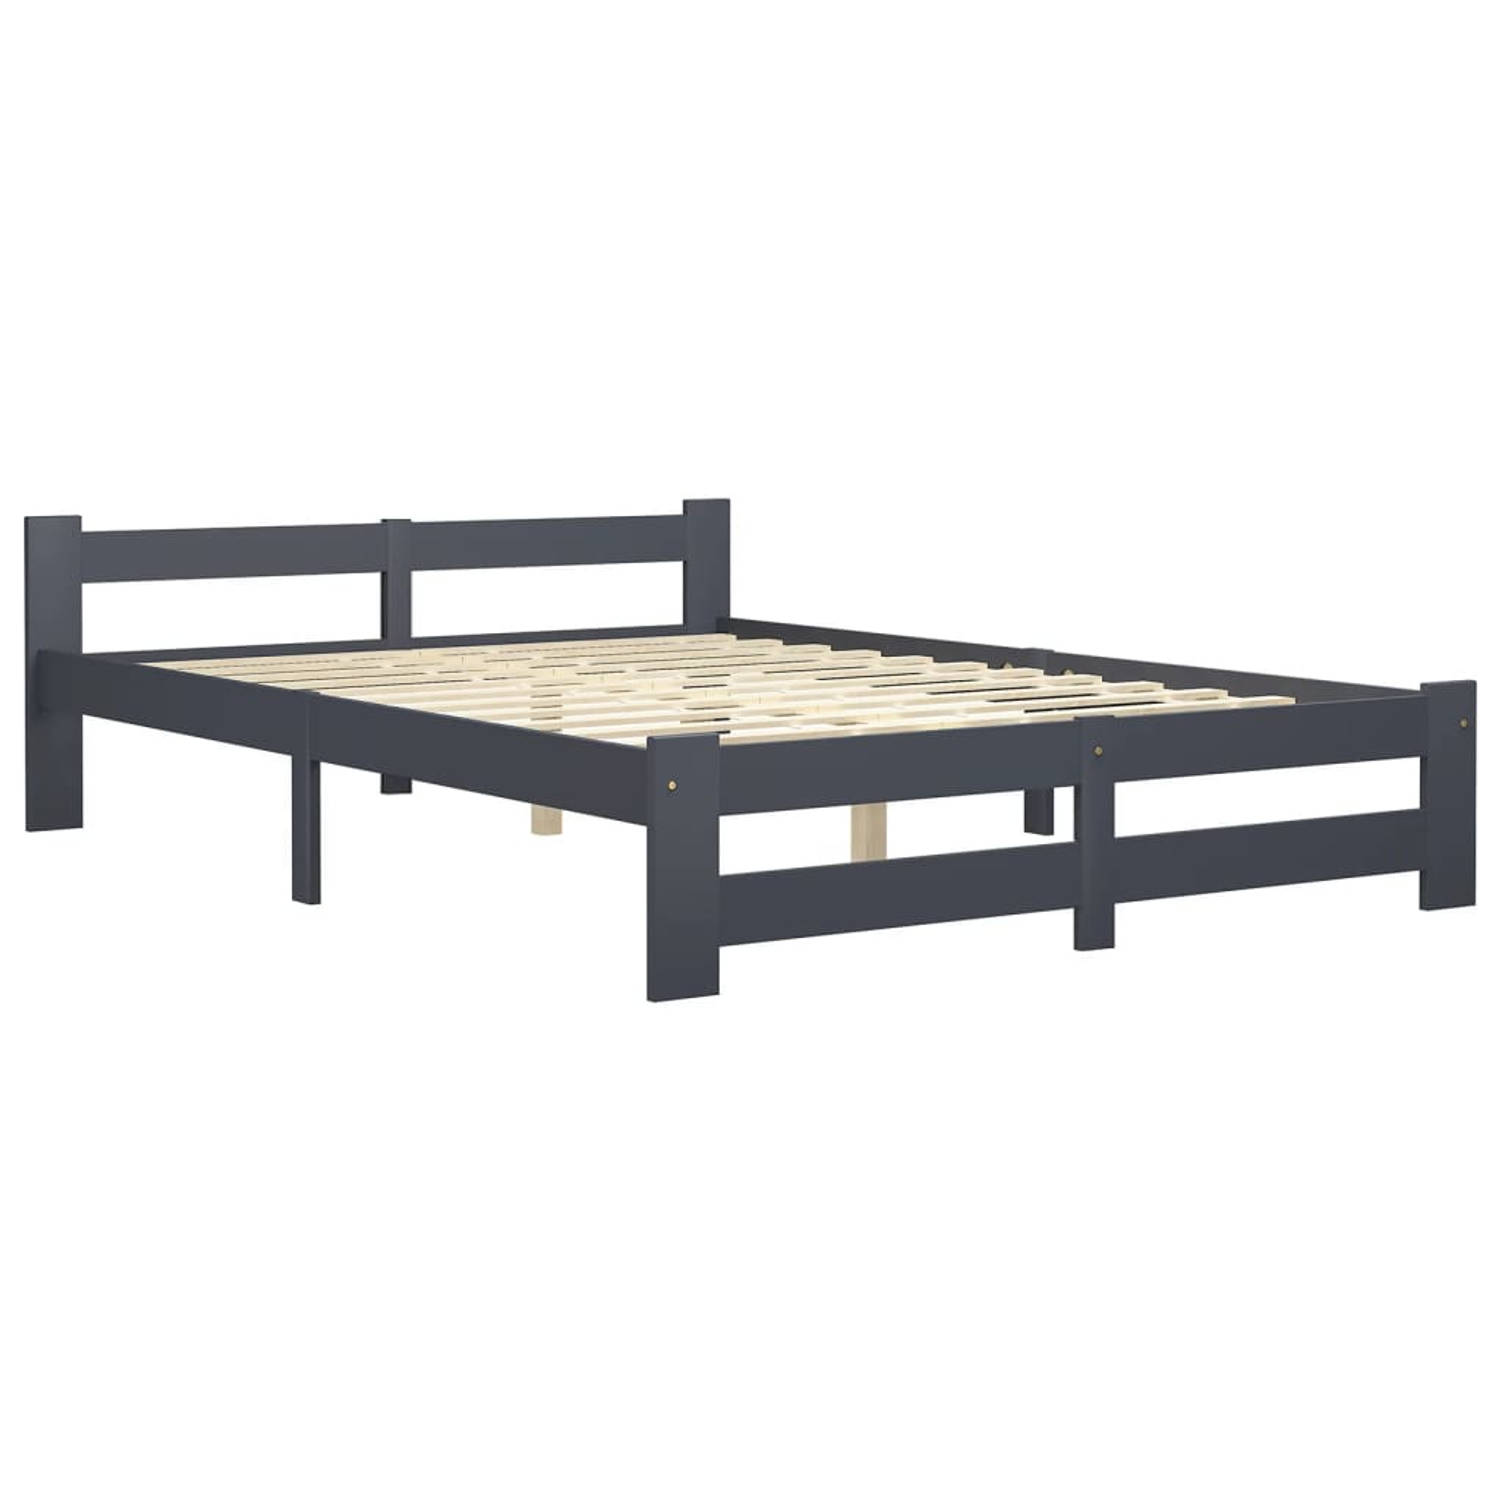 The Living Store Bedframe massief grenenhout donkergrijs 140x200 cm - Bedframe - Bedframes - Bed Frame - Bed Frames - Bed - Bedden - Houten Bedframe - Houten Bedframes - 2-persoons